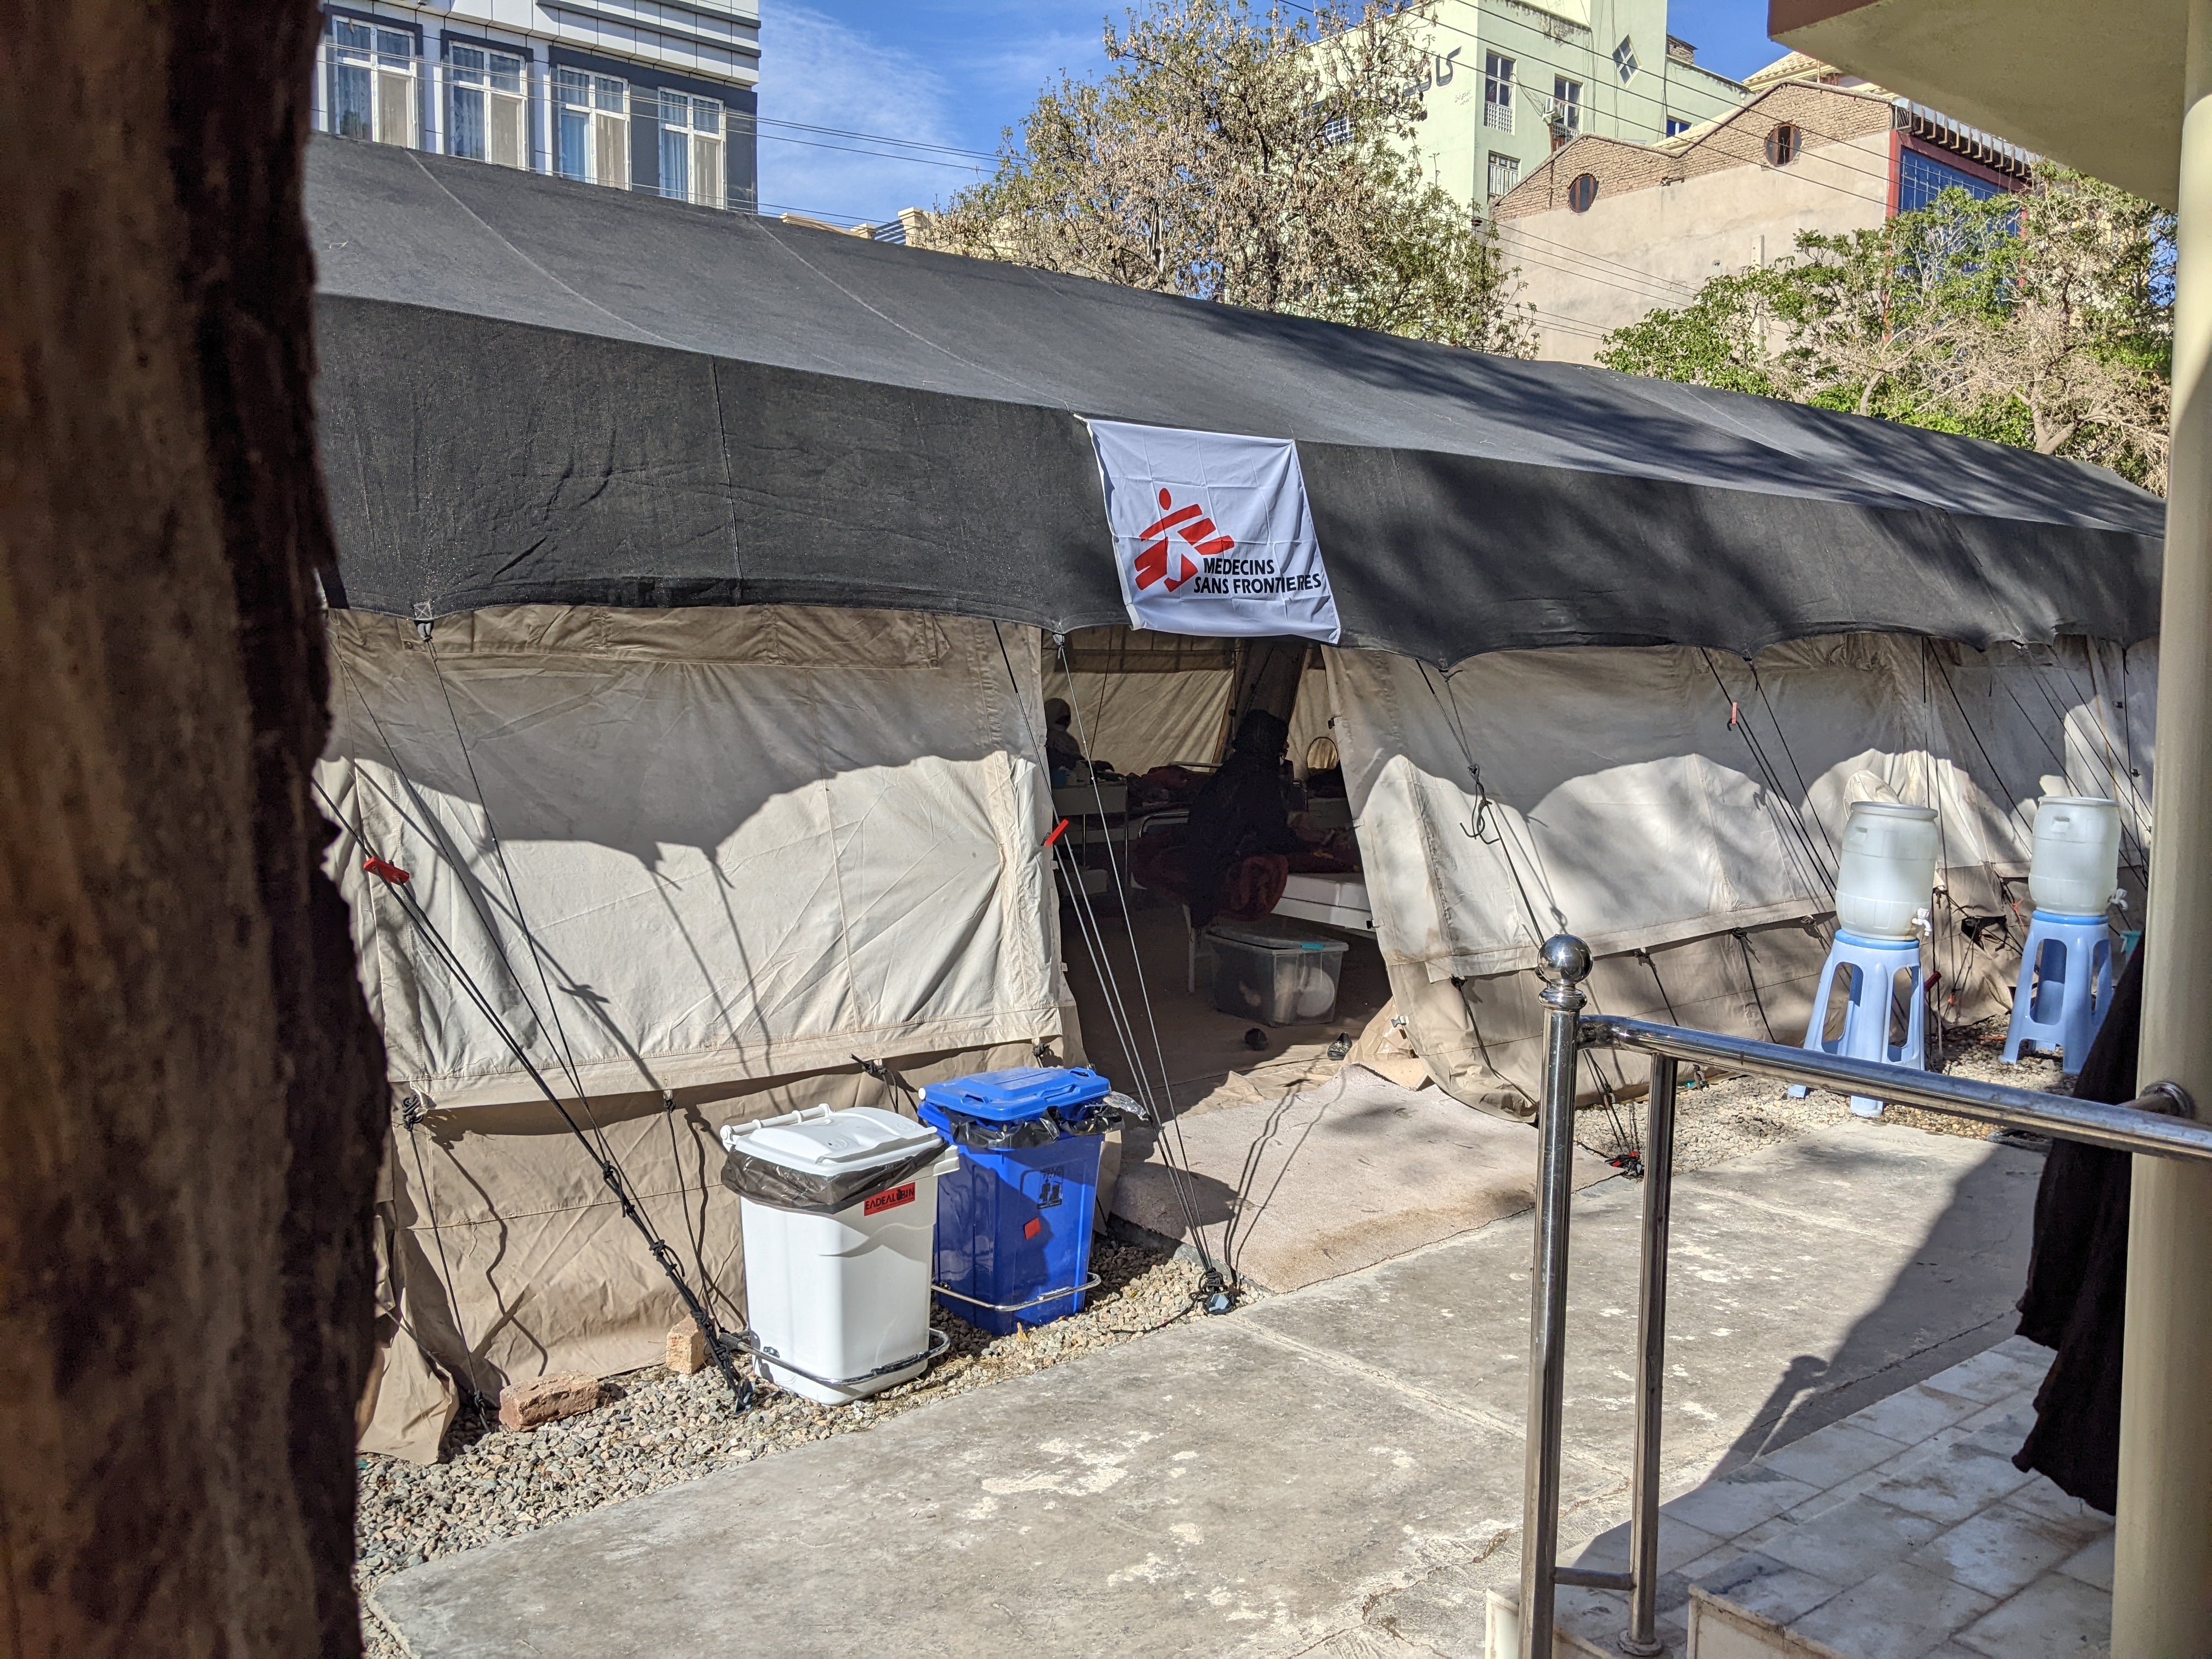 High levels of measles have meant that teams have created additional bedspace for measles patients